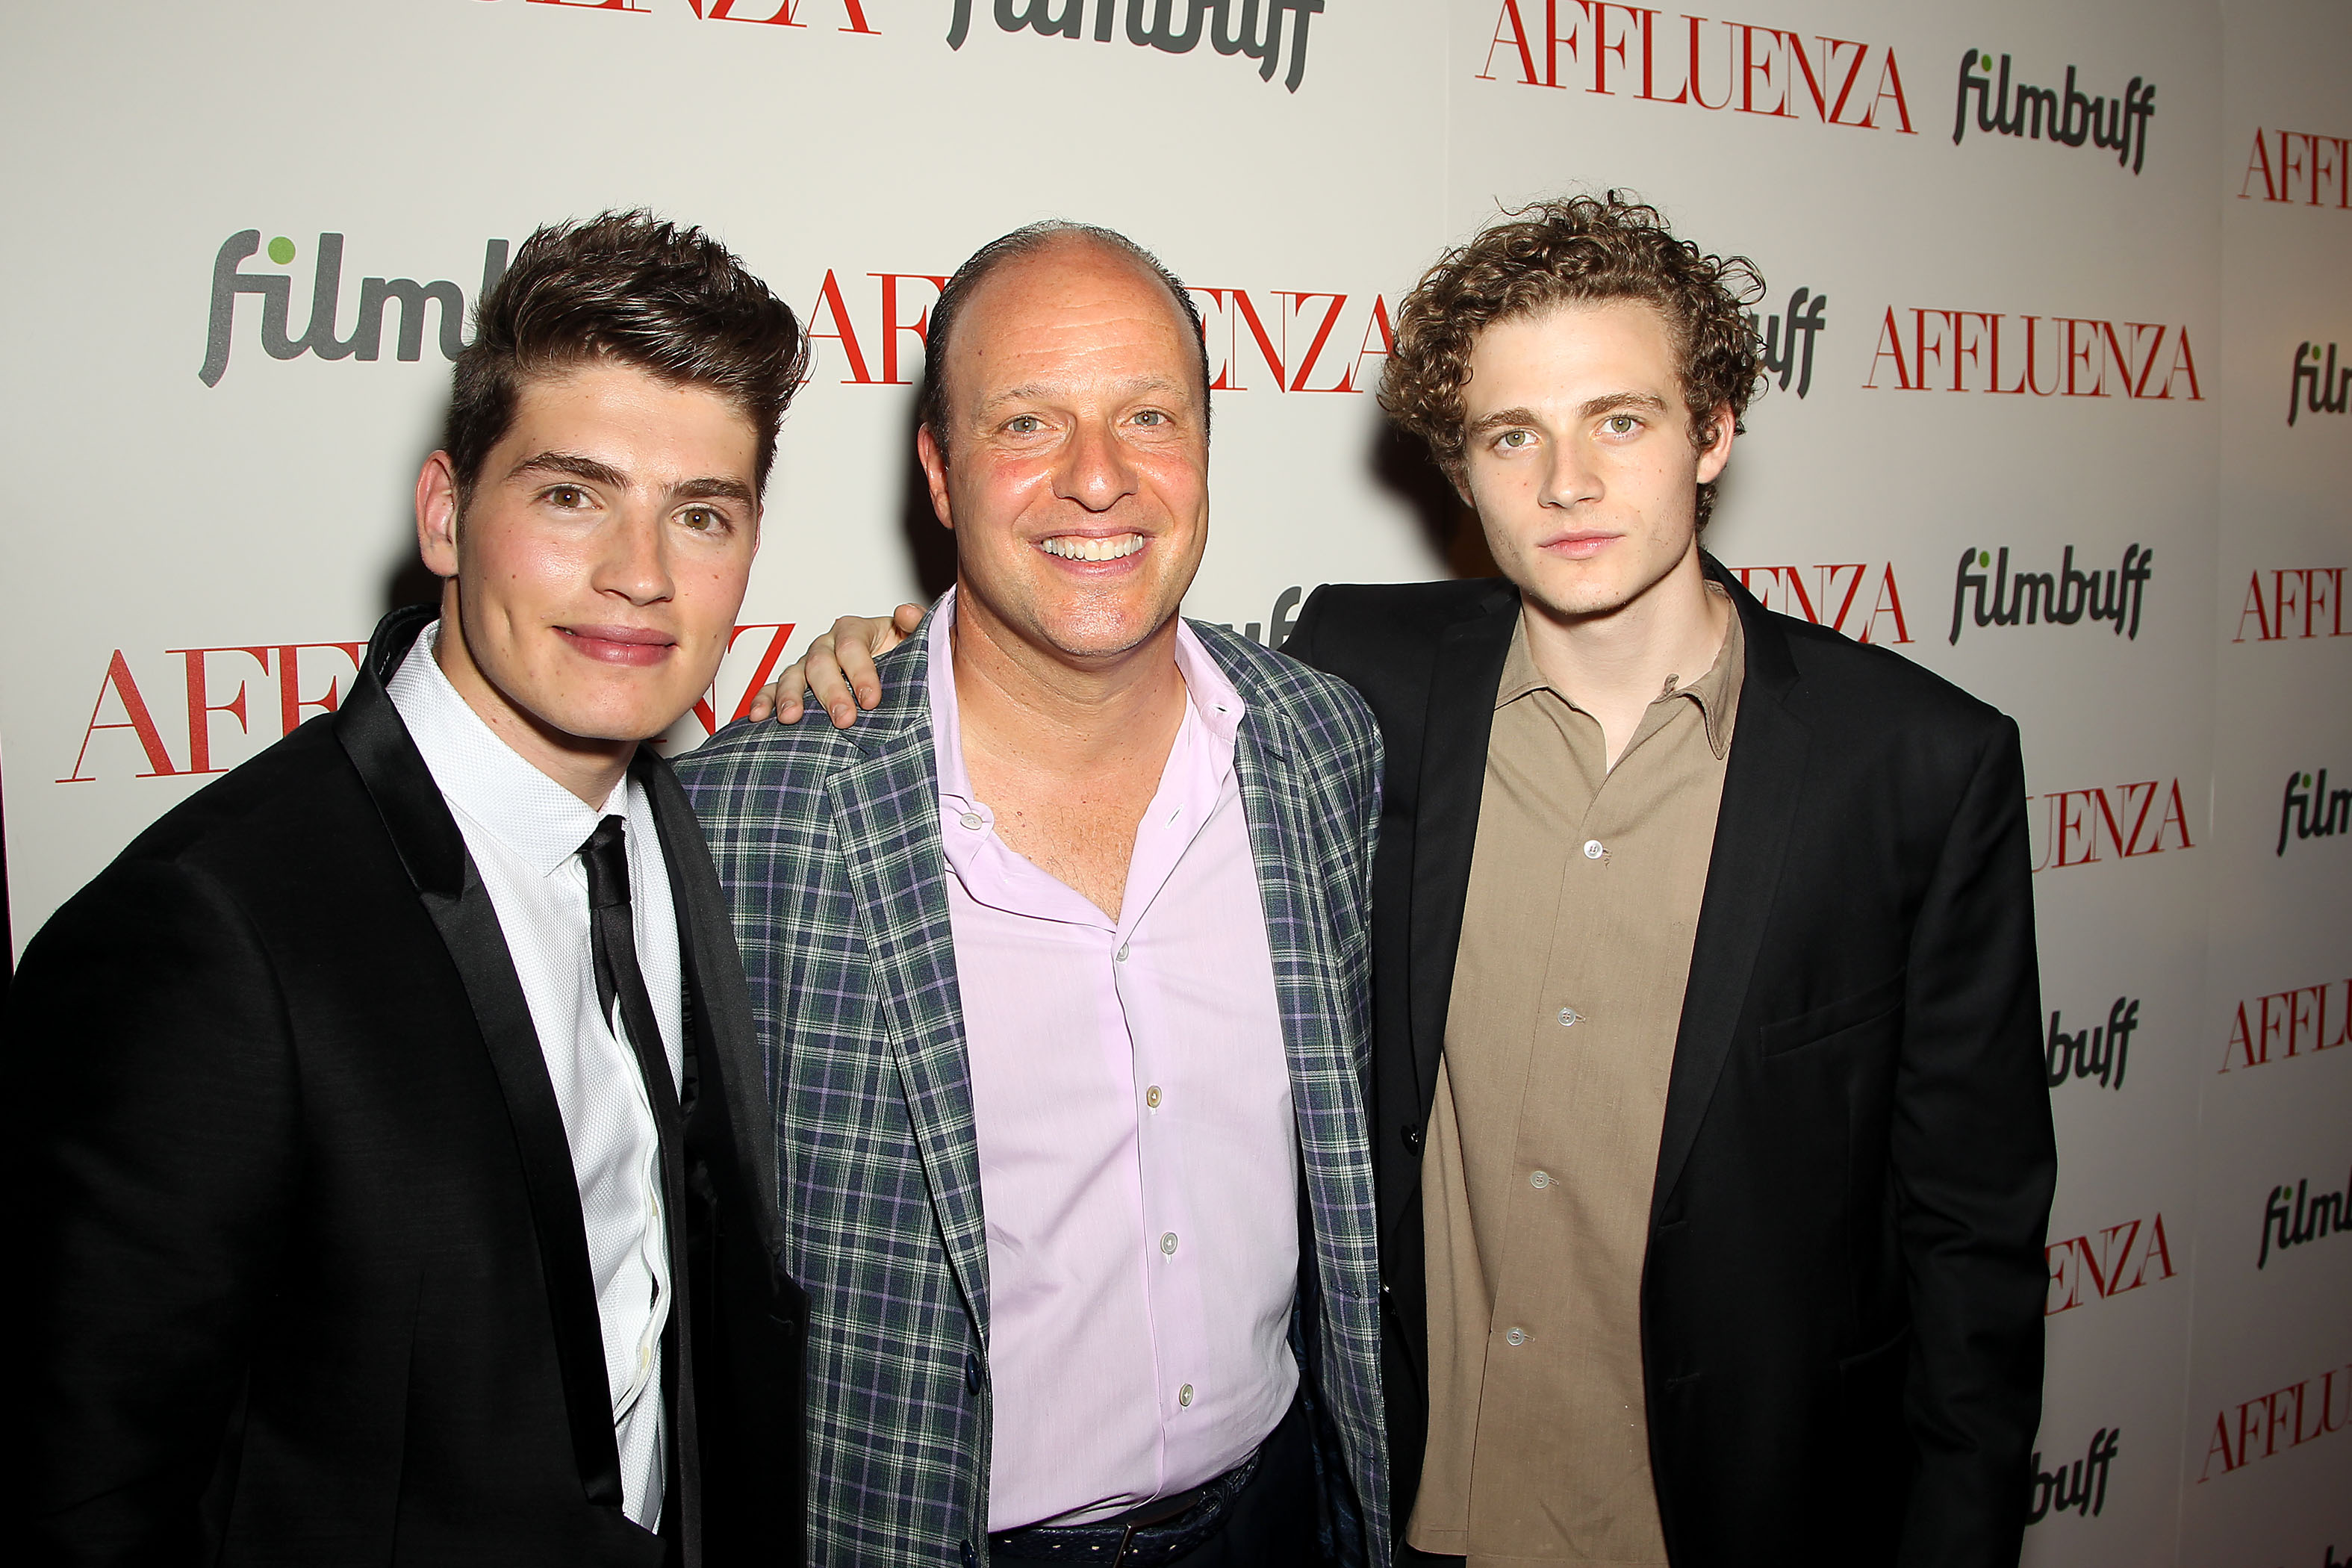 Producer Morris S. Levy with actors Gregg Sulkin and Ben Rosenfield at the premiere for the Film, Affluenza.